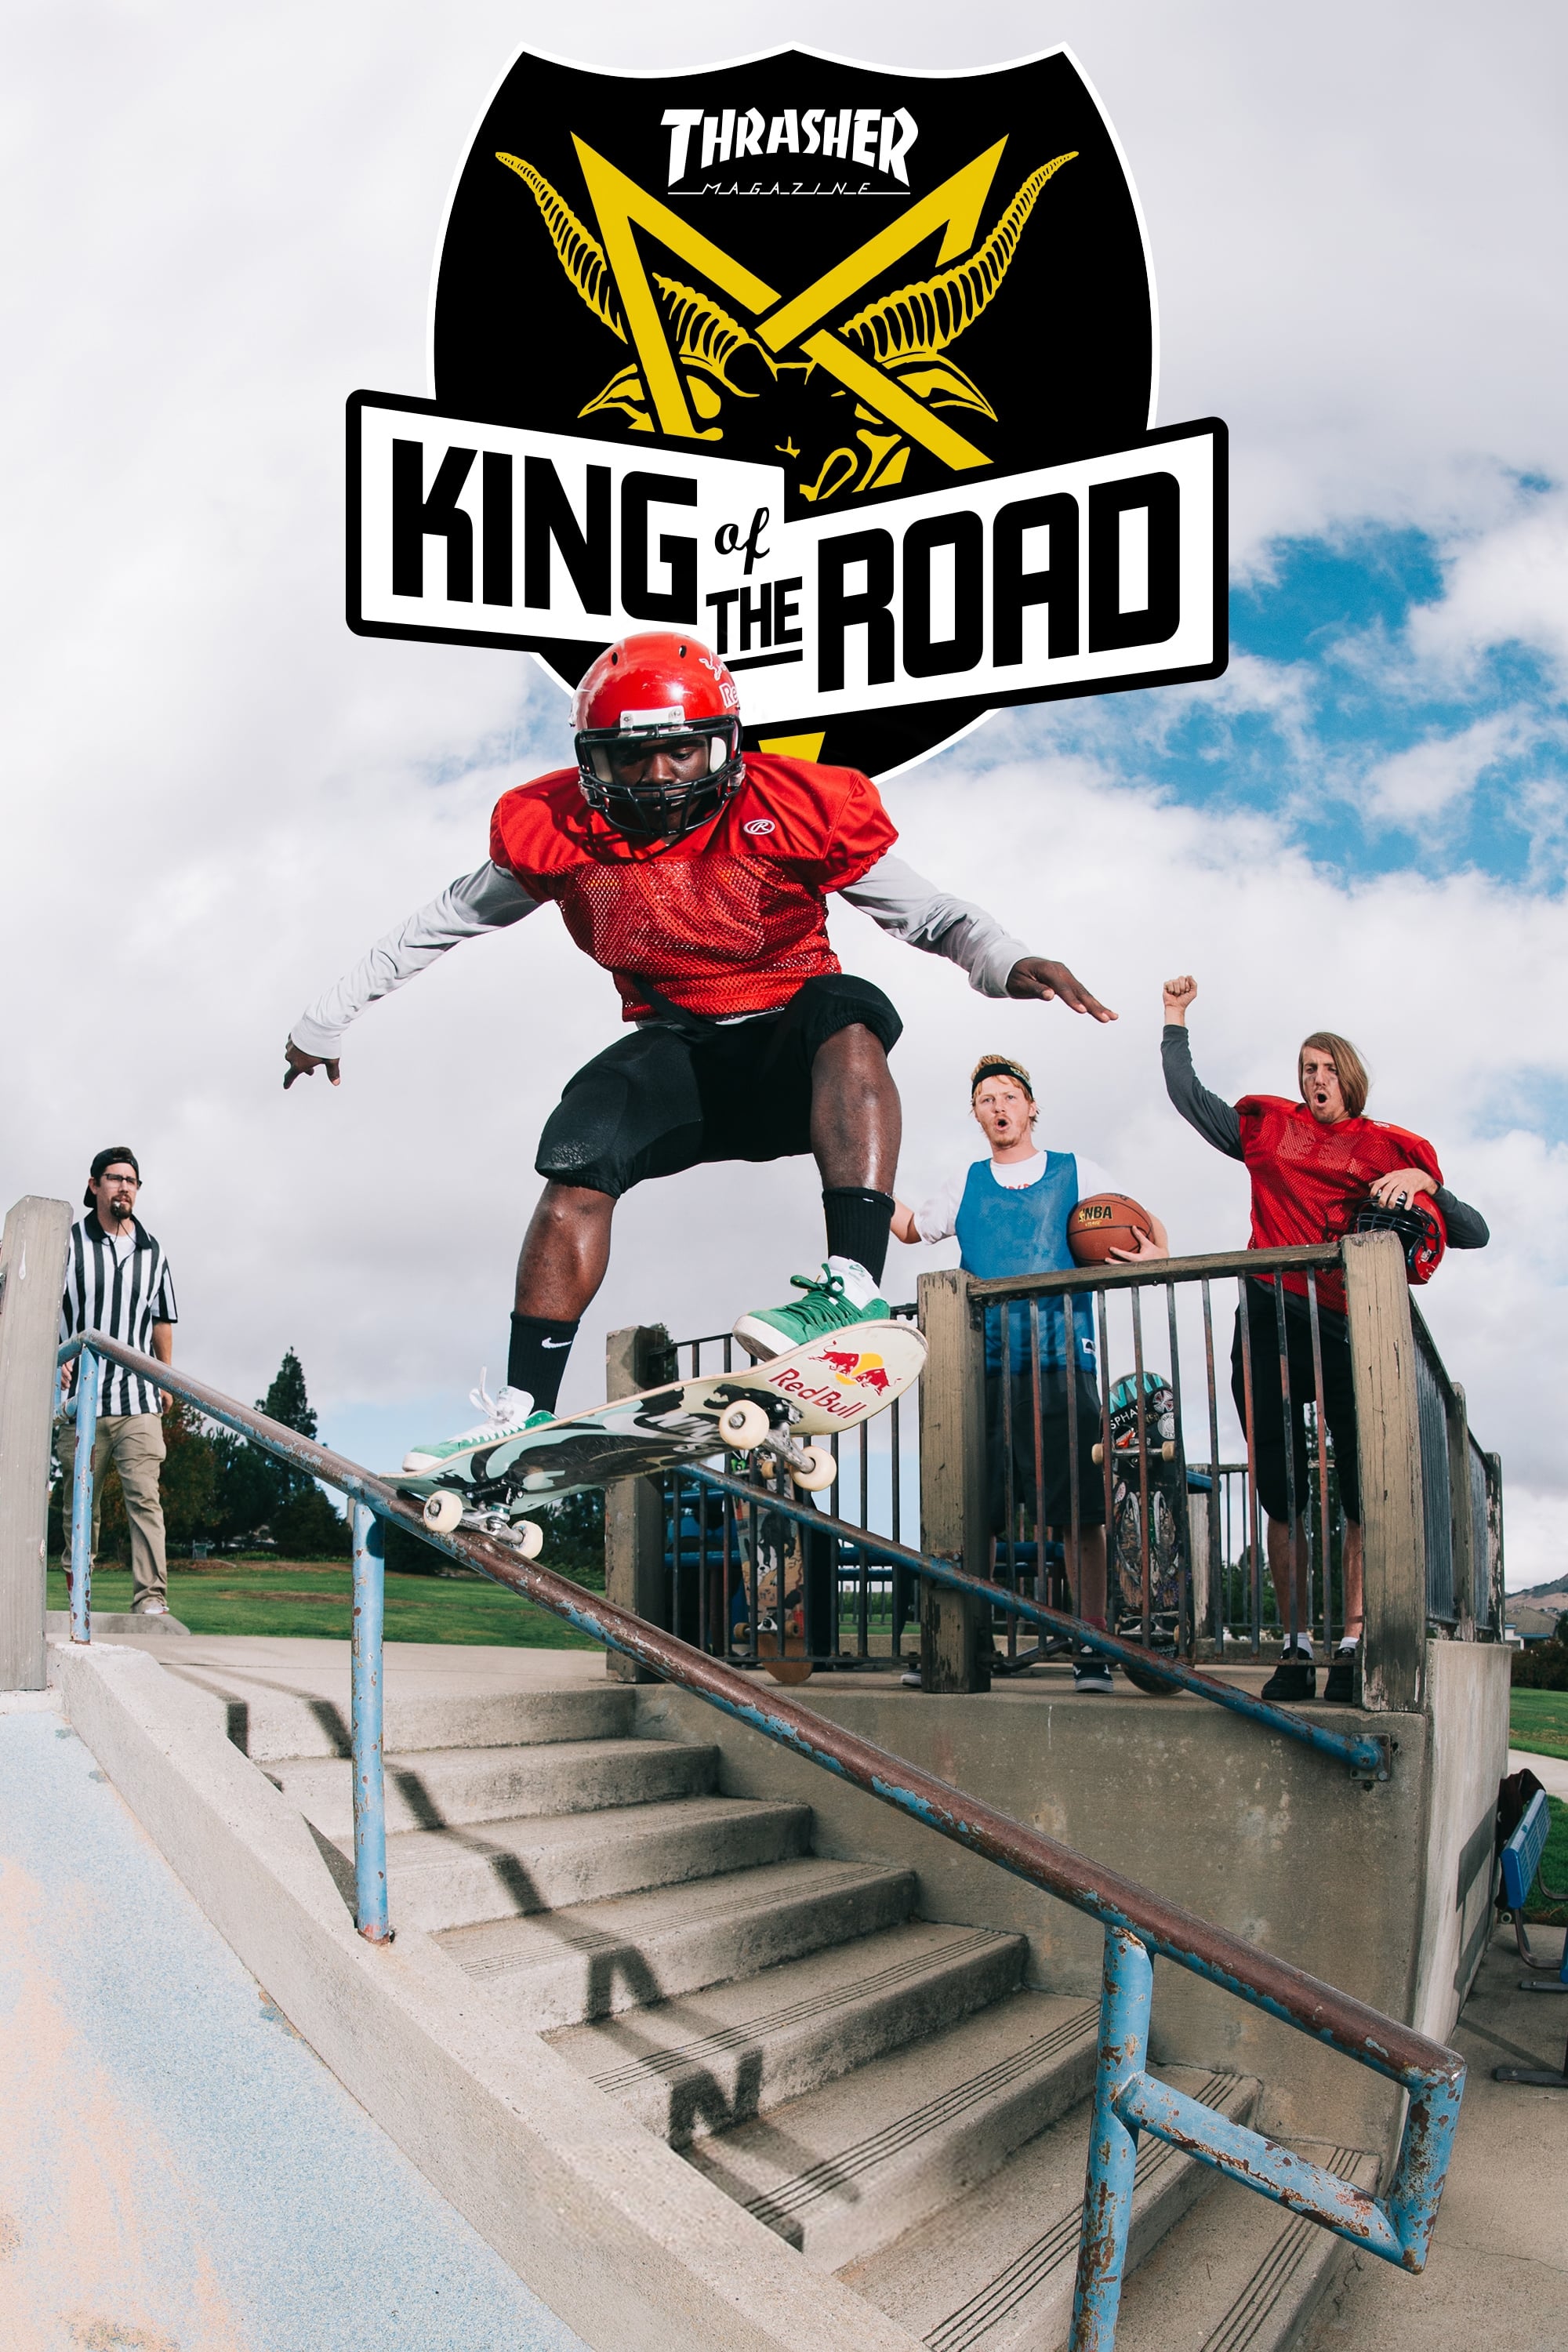 King of the Road TV Shows About Skateboarding